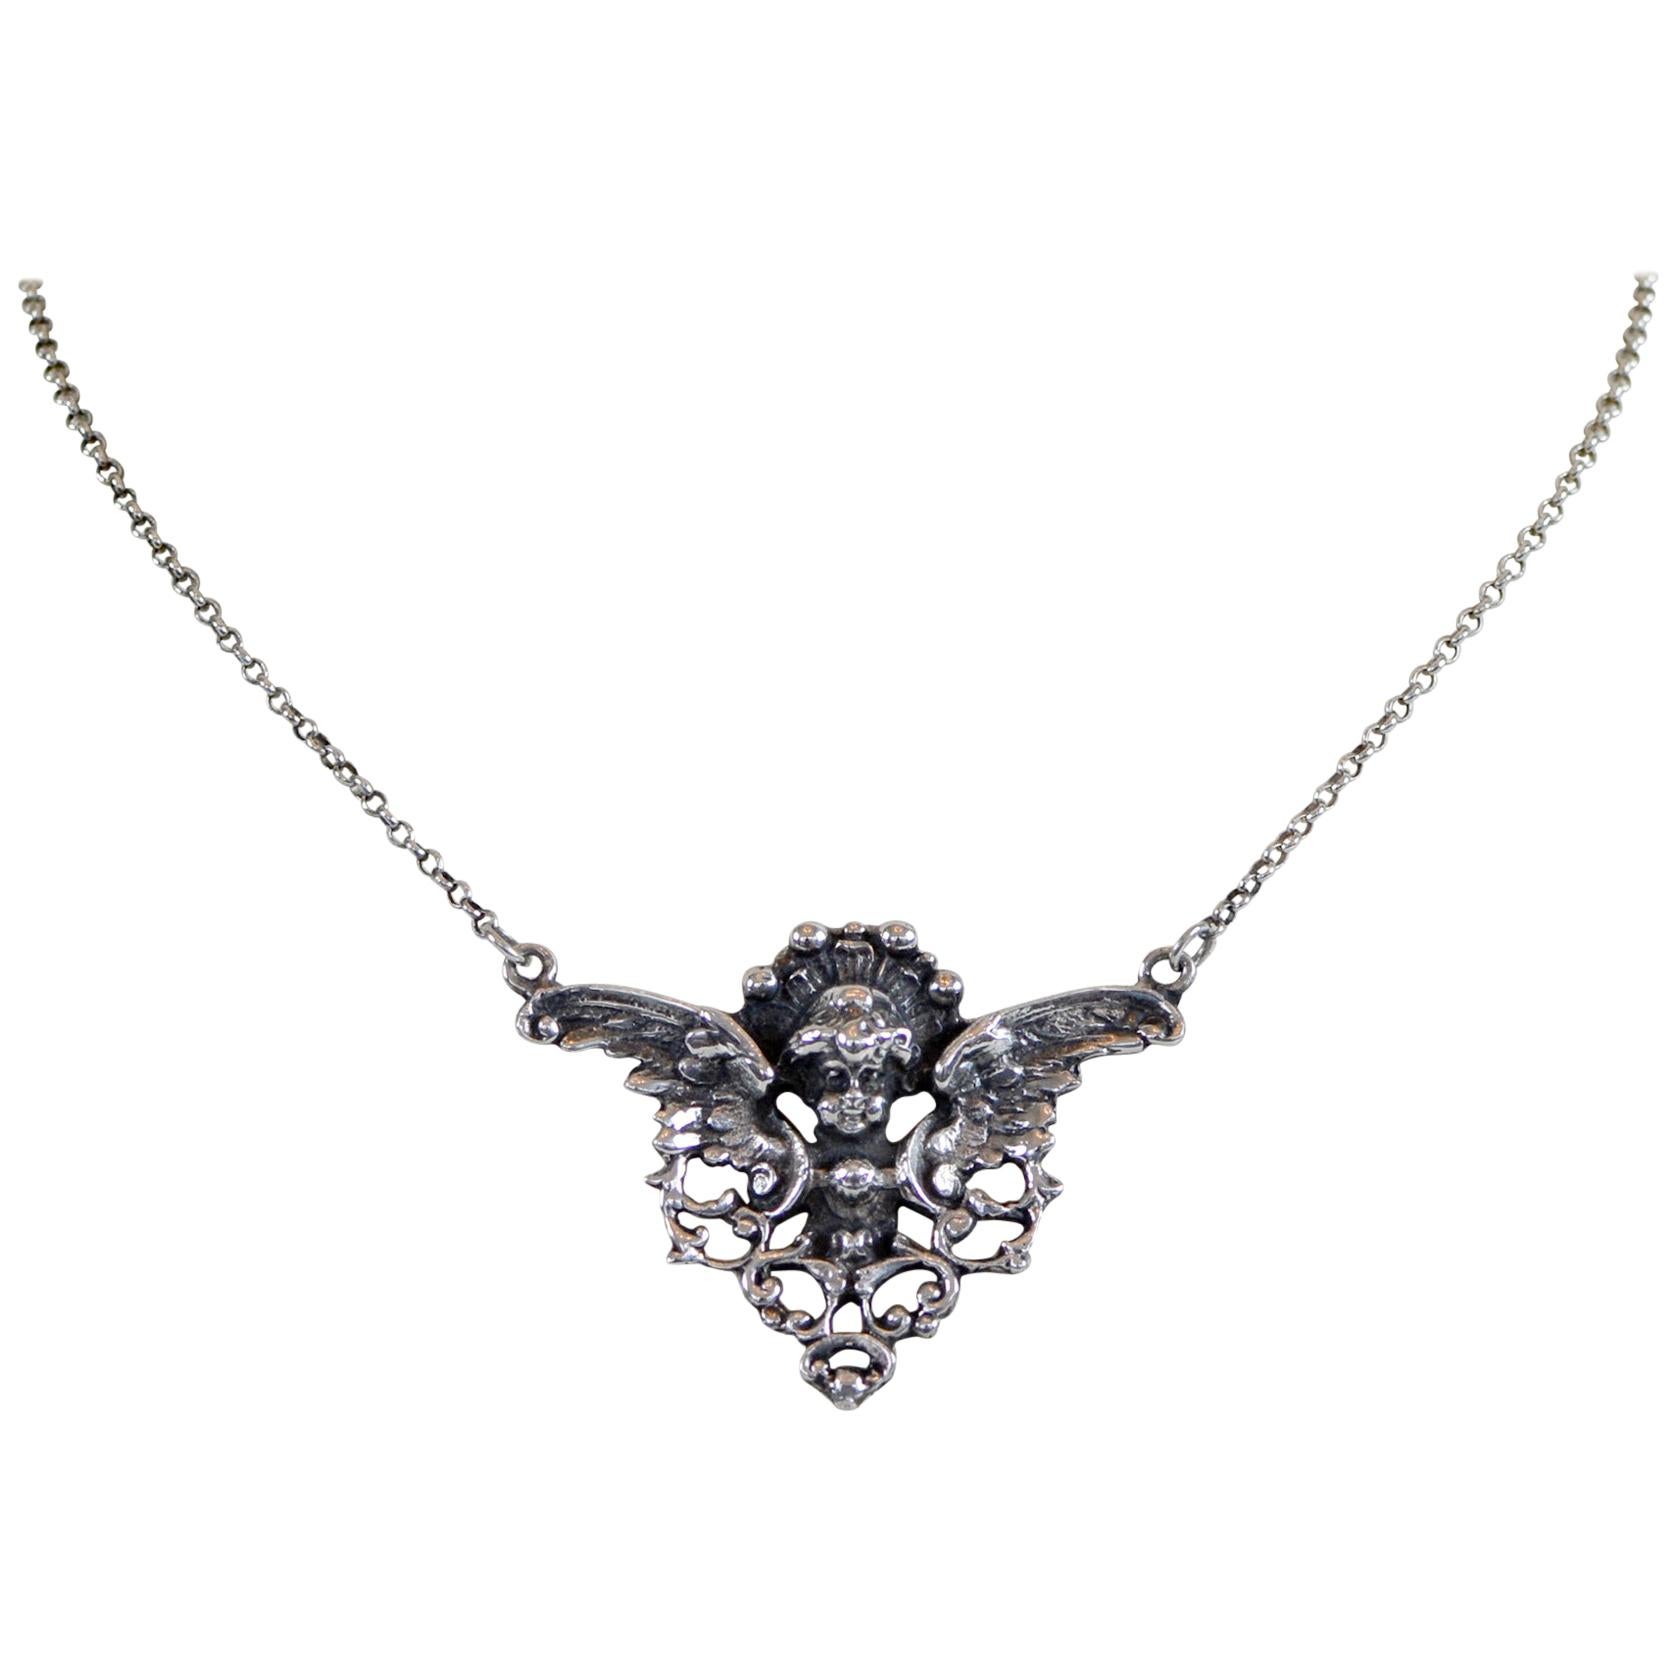 Jill Garber Rococo Winged Archangel Michael Pendant Necklace in Sterling Silver For Sale